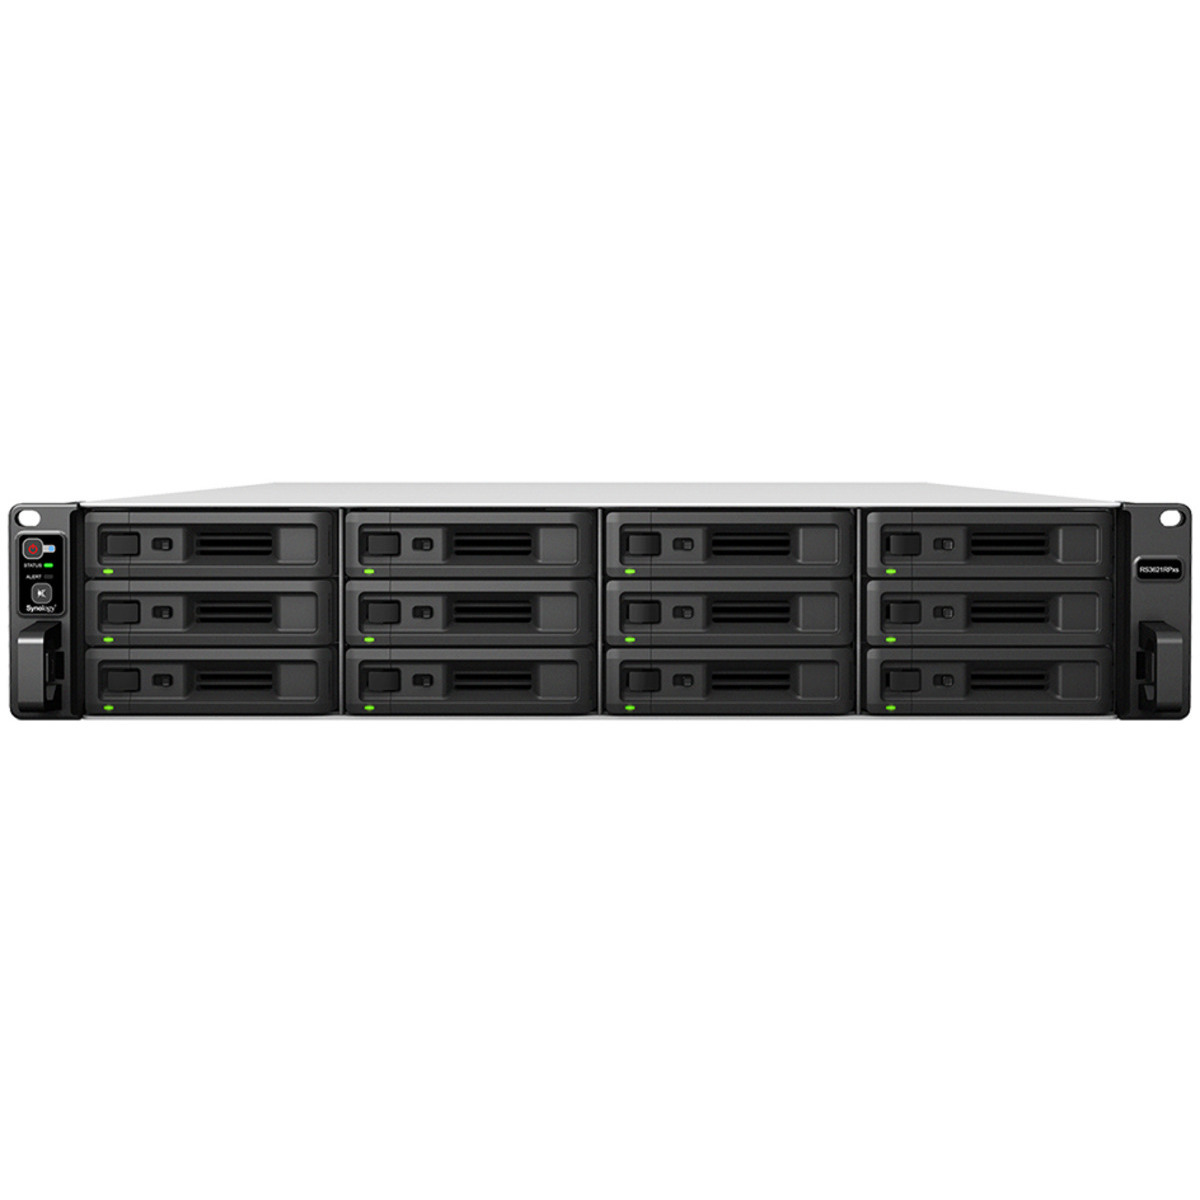 Synology RackStation RS3621RPxs 144tb 12-Bay RackMount Large Business / Enterprise NAS - Network Attached Storage Device 8x18tb Western Digital Ultrastar DC HC550 WUH721818ALE6L4 3.5 7200rpm SATA 6Gb/s HDD ENTERPRISE Class Drives Installed - Burn-In Tested RackStation RS3621RPxs